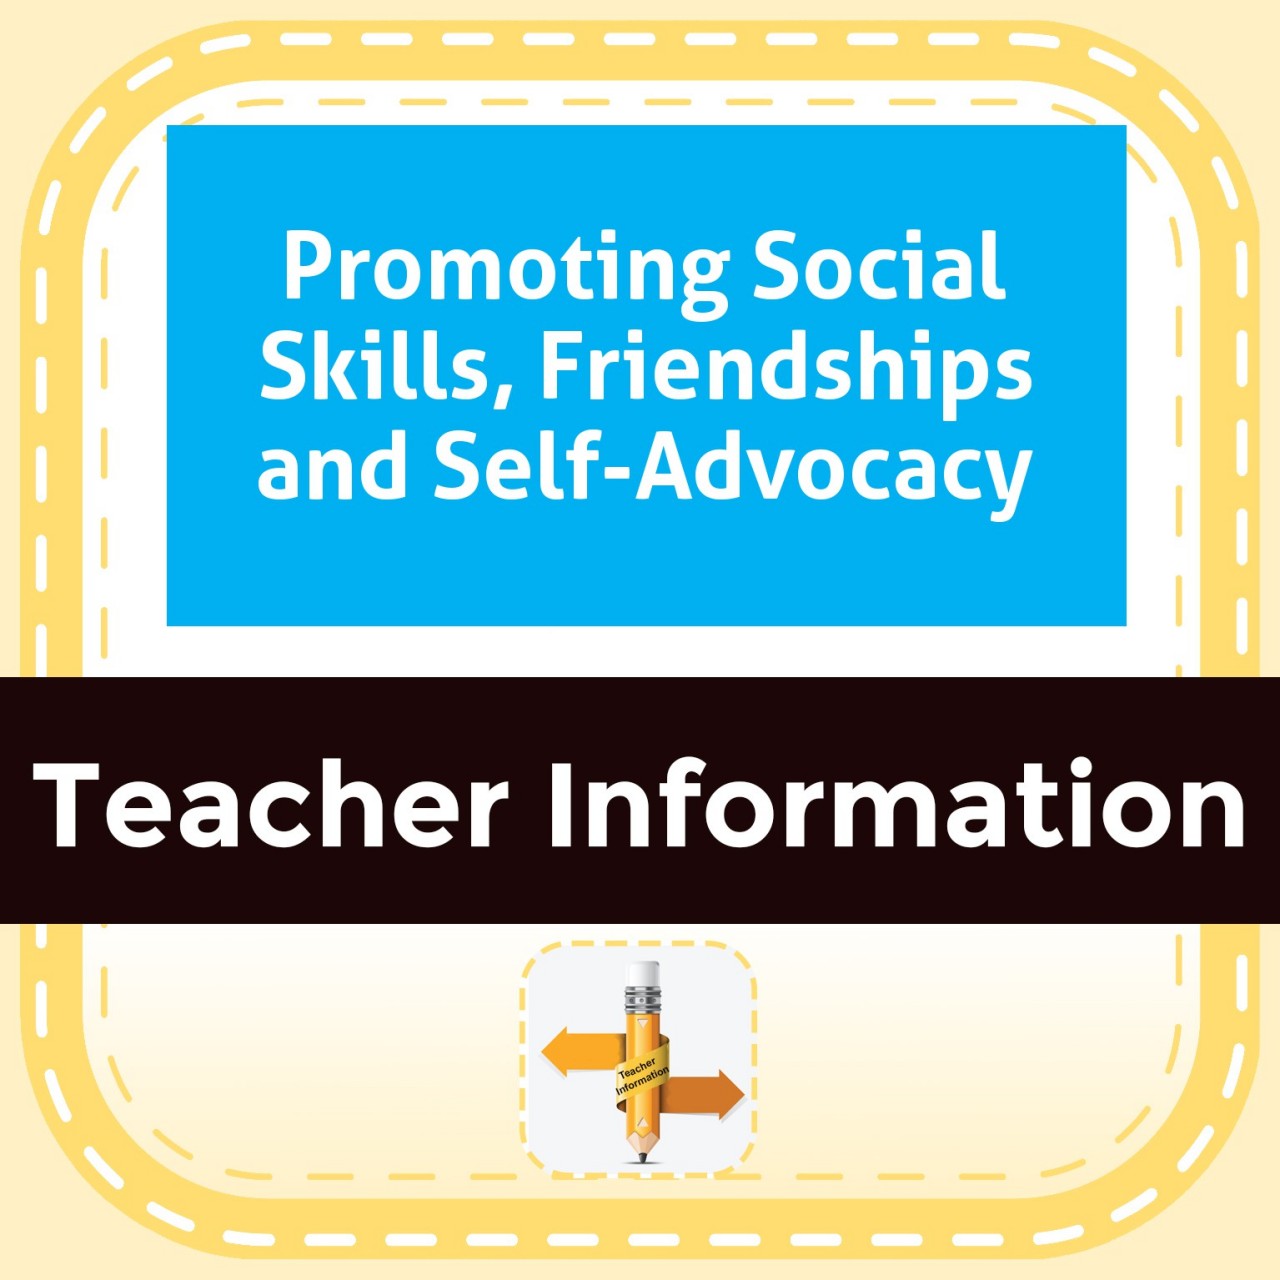 Promoting Social Skills, Friendships and Self-Advocacy